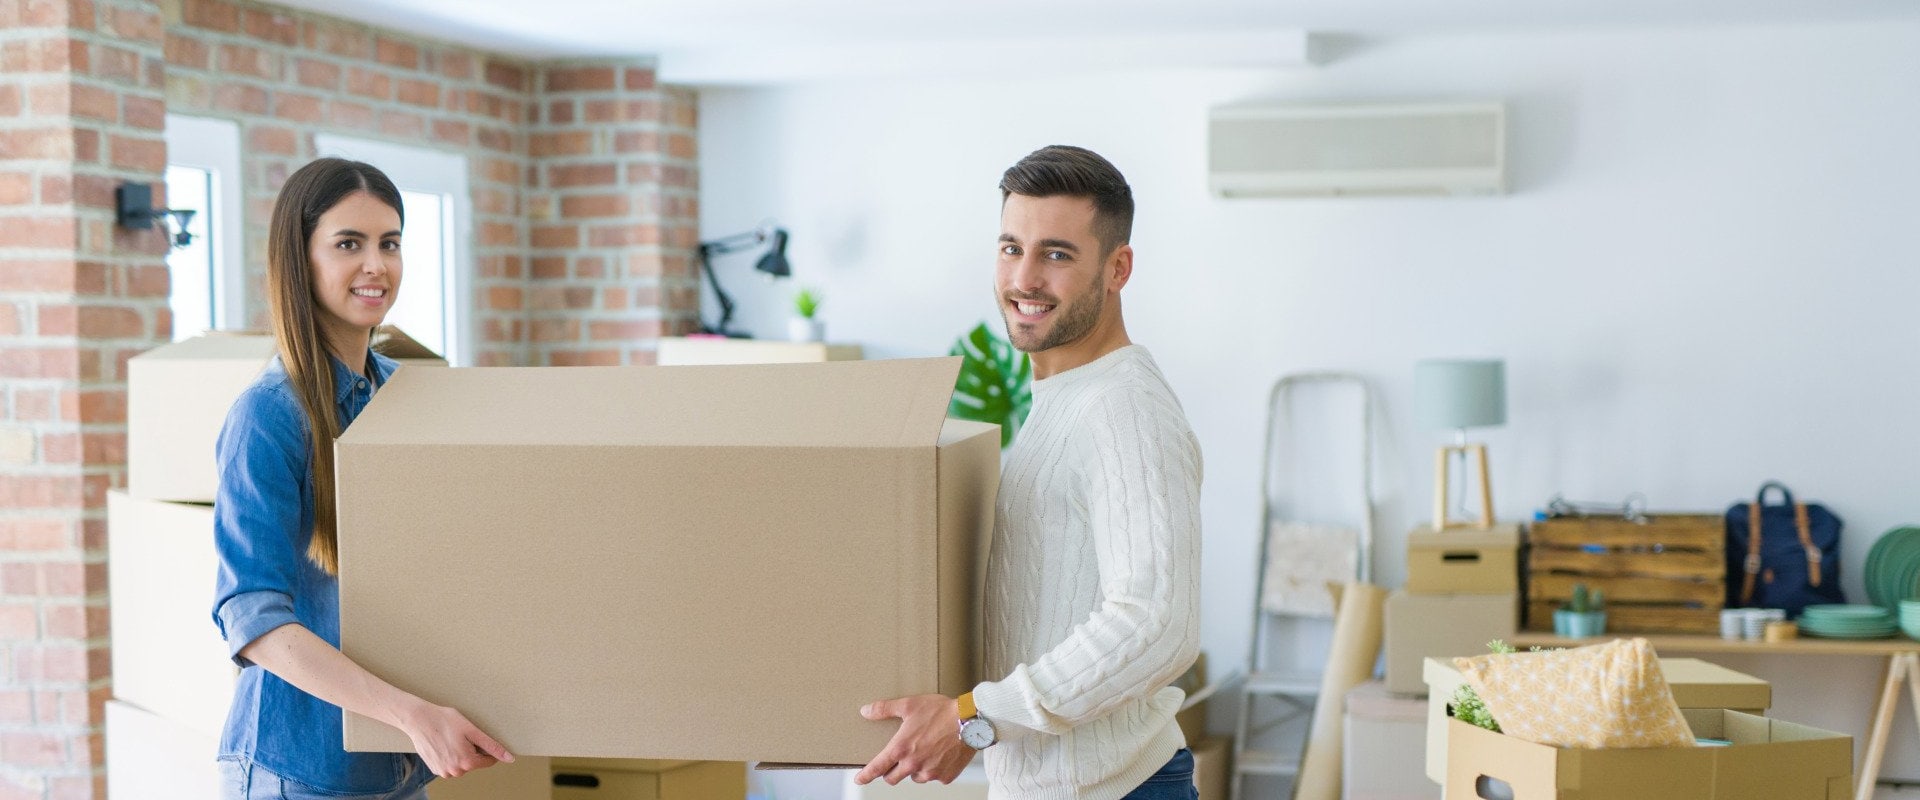 Streamlining Relocations with Packing and Crating Services from Three Movers